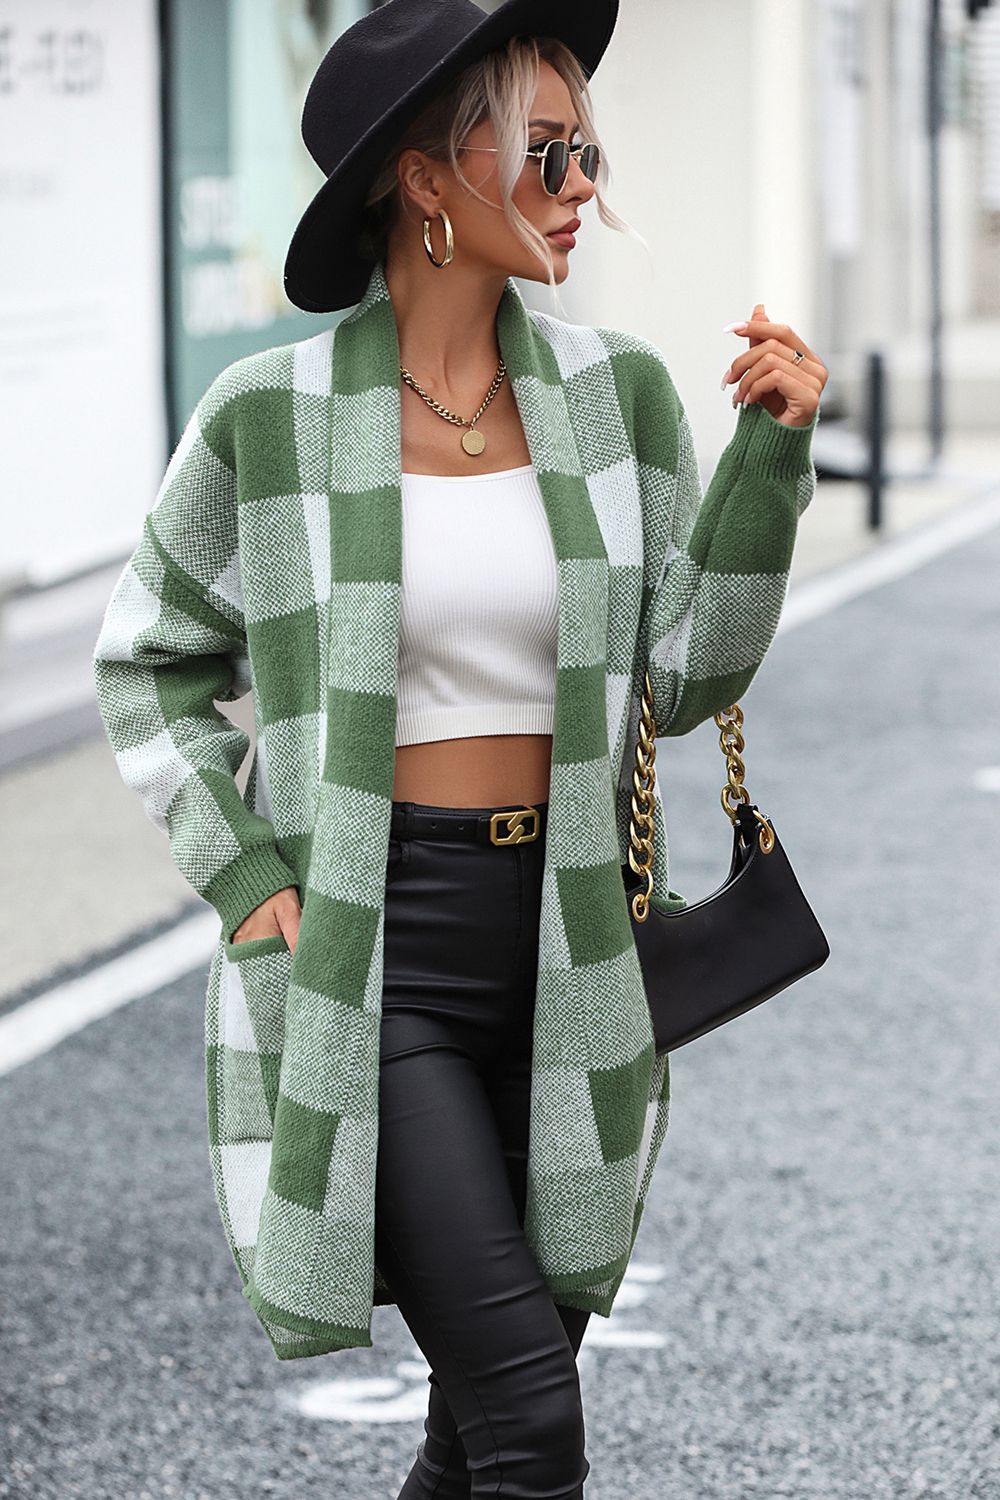 Plaid Dropped Shoulder Cardigan with Pocket Print on any thing USA/STOD clothes